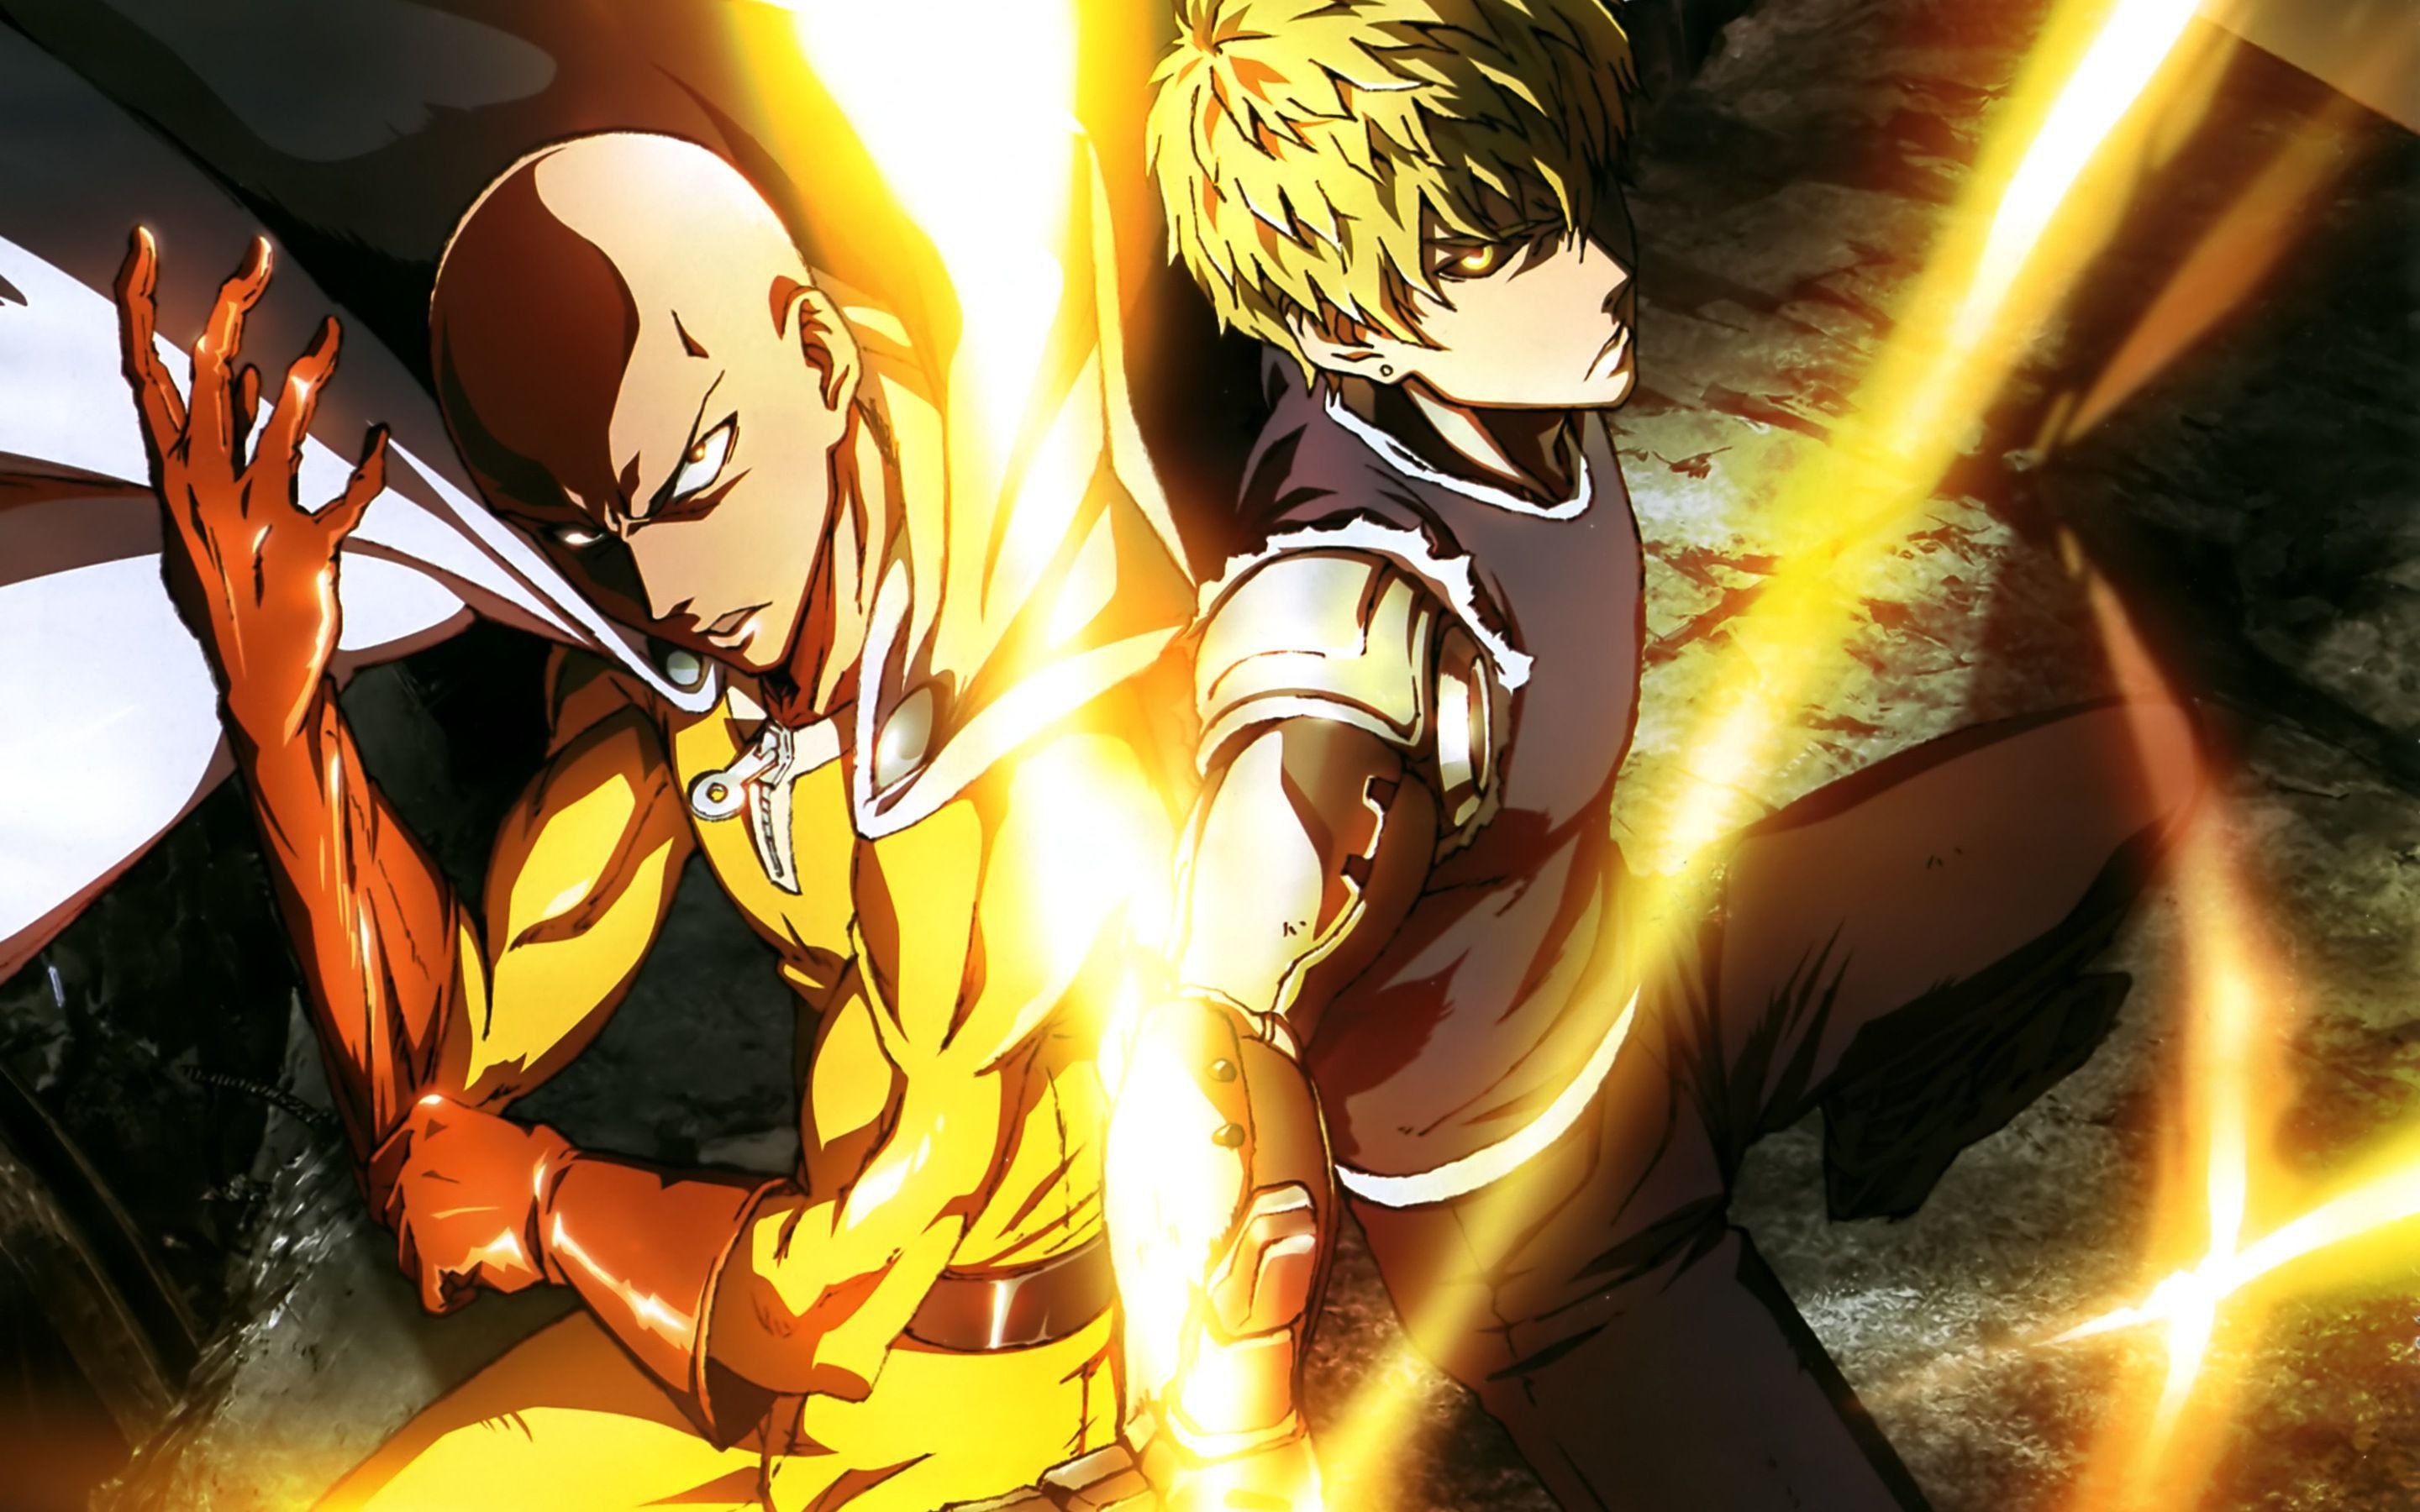 10 Latest One Punch Man Wallpaper Hd FULL HD 1920×1080 For PC